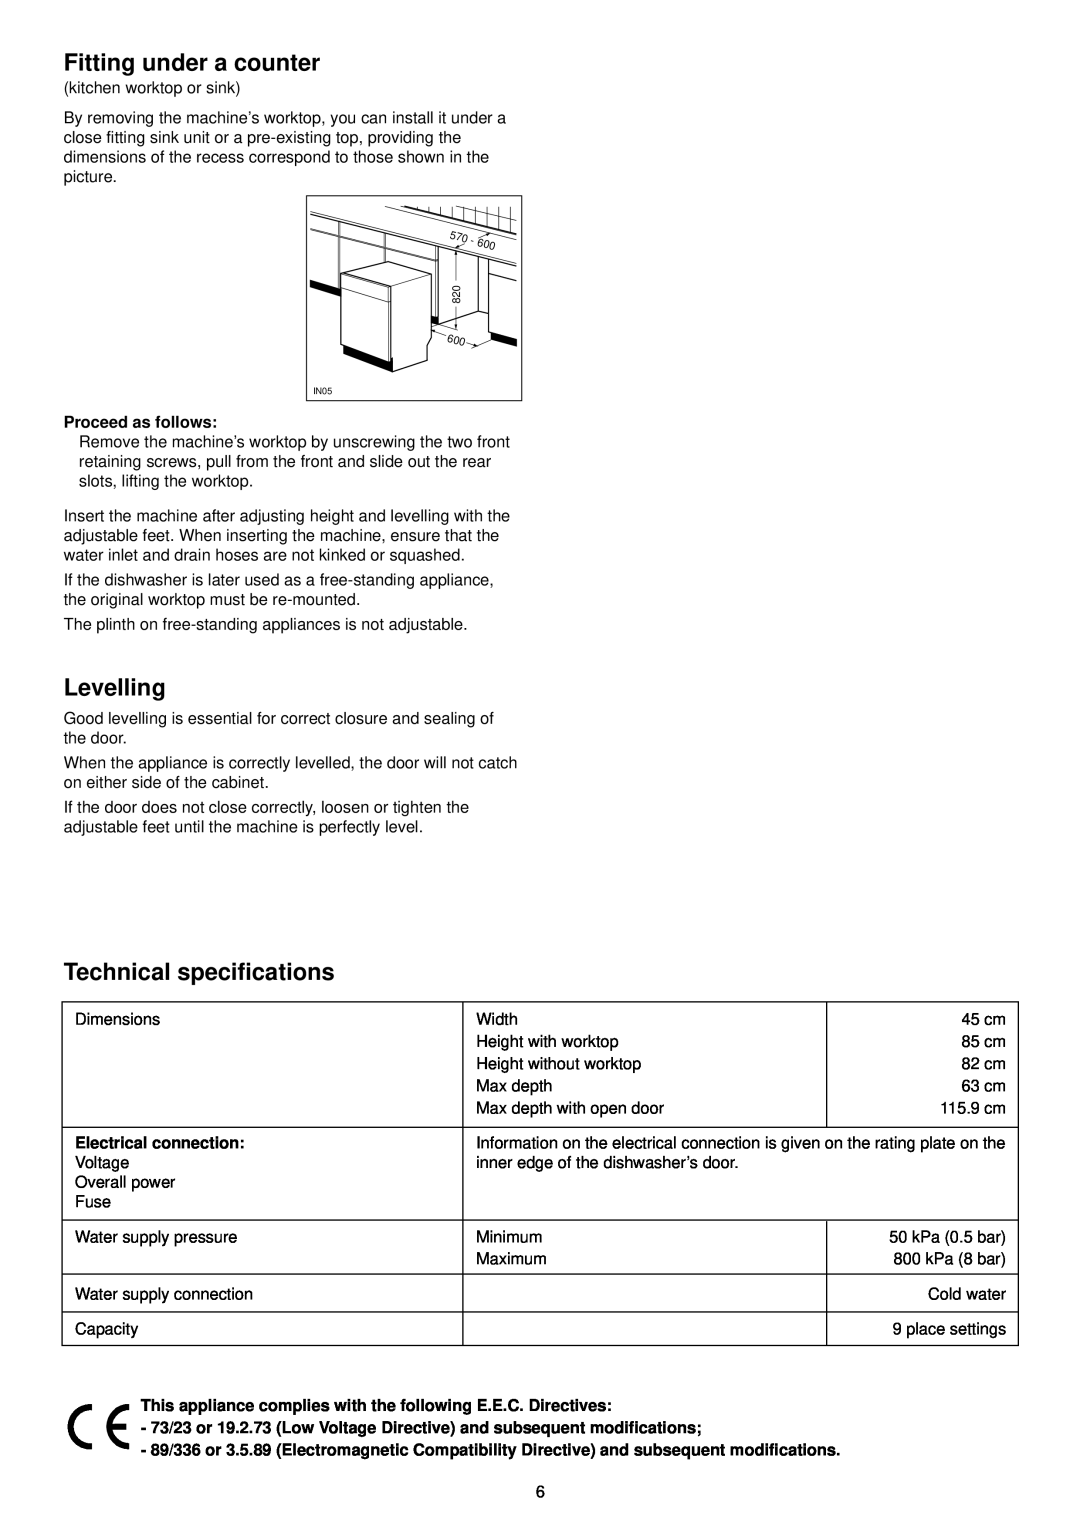 Zanussi DA 4142 manual Fitting under a counter, Levelling, Technical specifications 